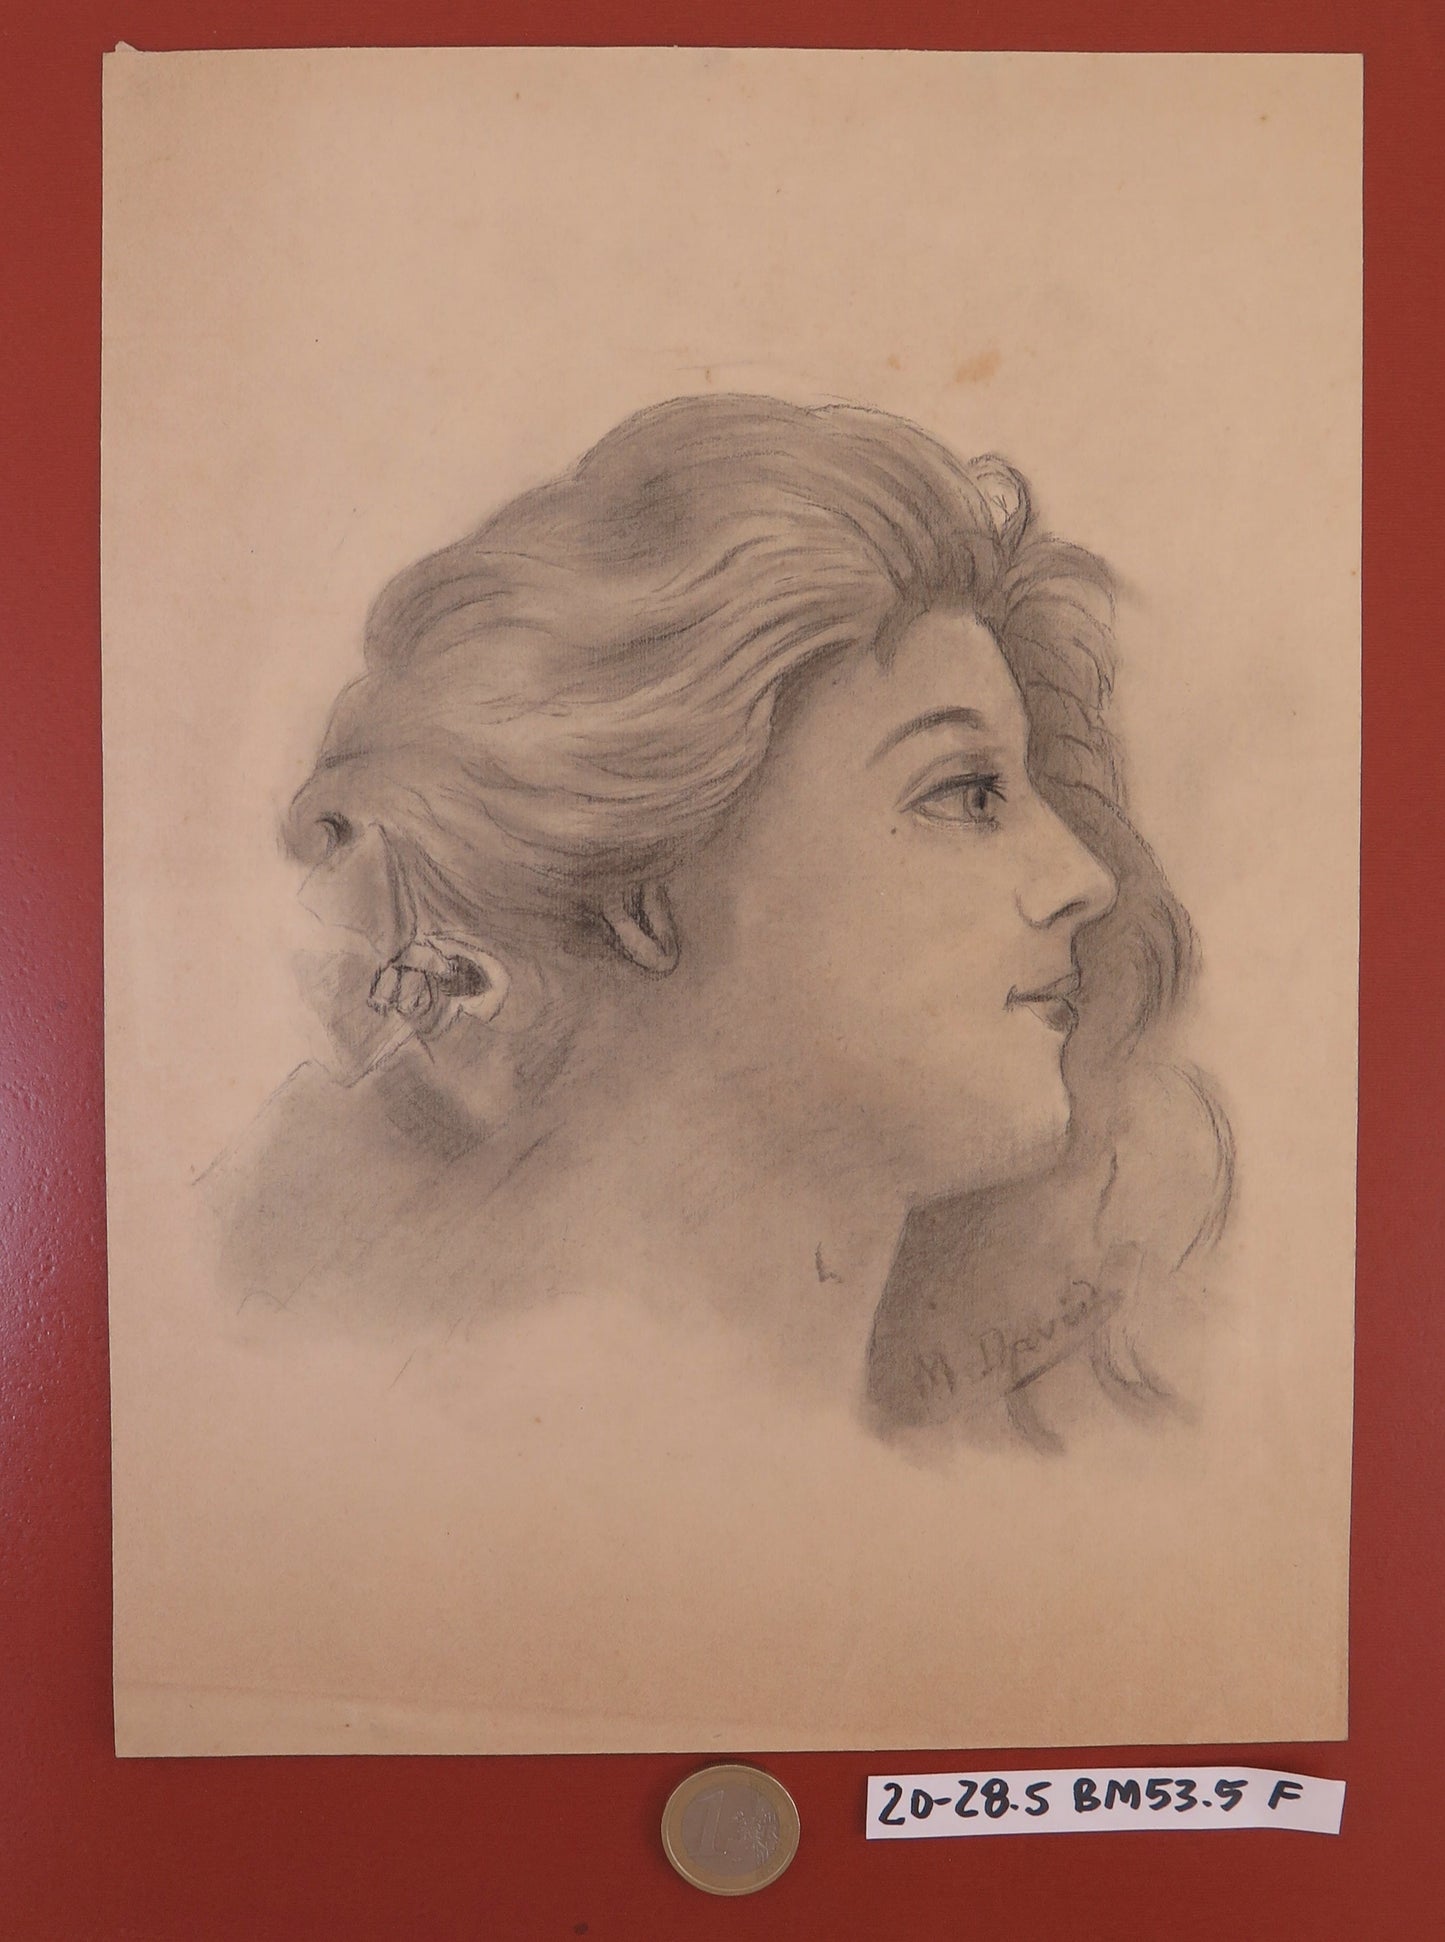 ANTIQUE DRAWING PORTRAIT OF A YOUNG WOMAN SIGNED PENCIL ON PAPER '900 BM53.5F